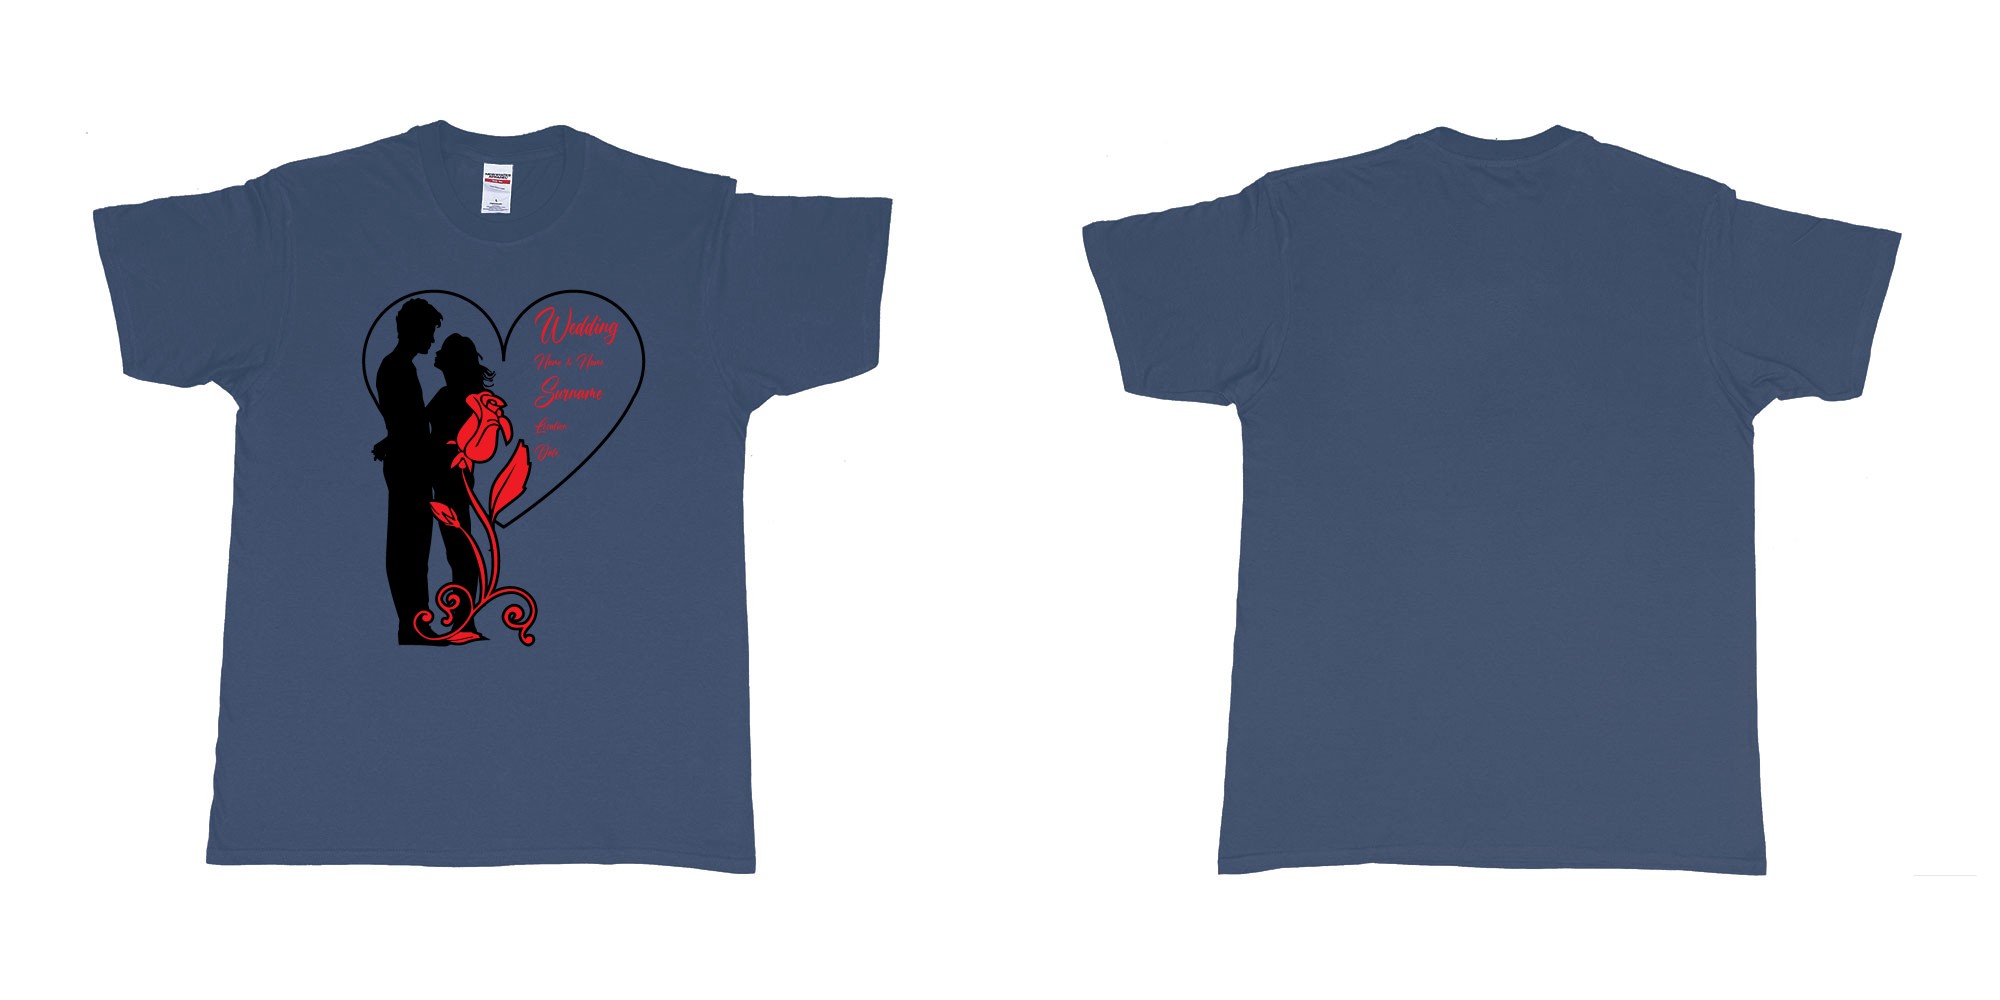 Custom tshirt design wedding couple rose heart in fabric color navy choice your own text made in Bali by The Pirate Way